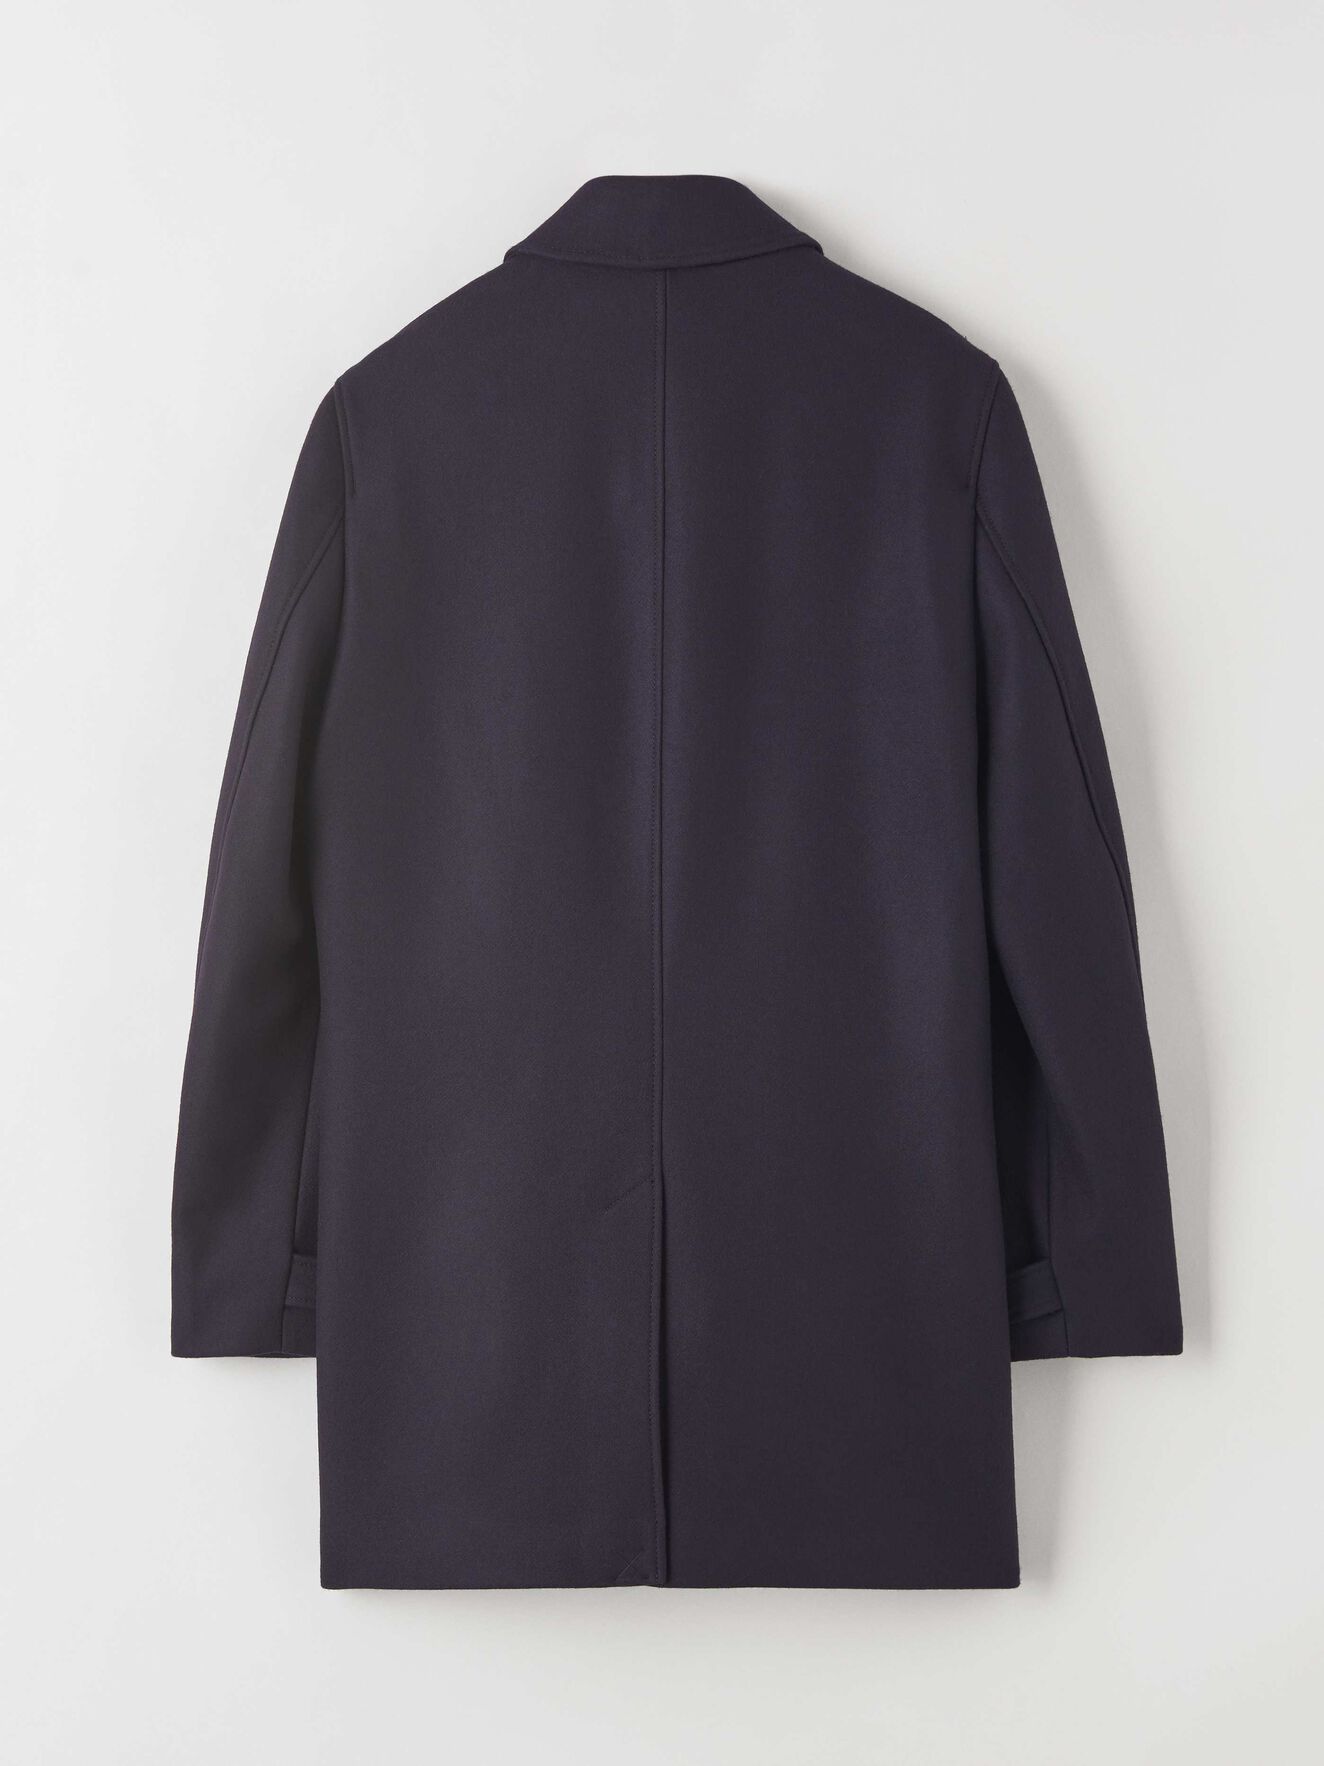 Carred Coat - Buy Outerwear online